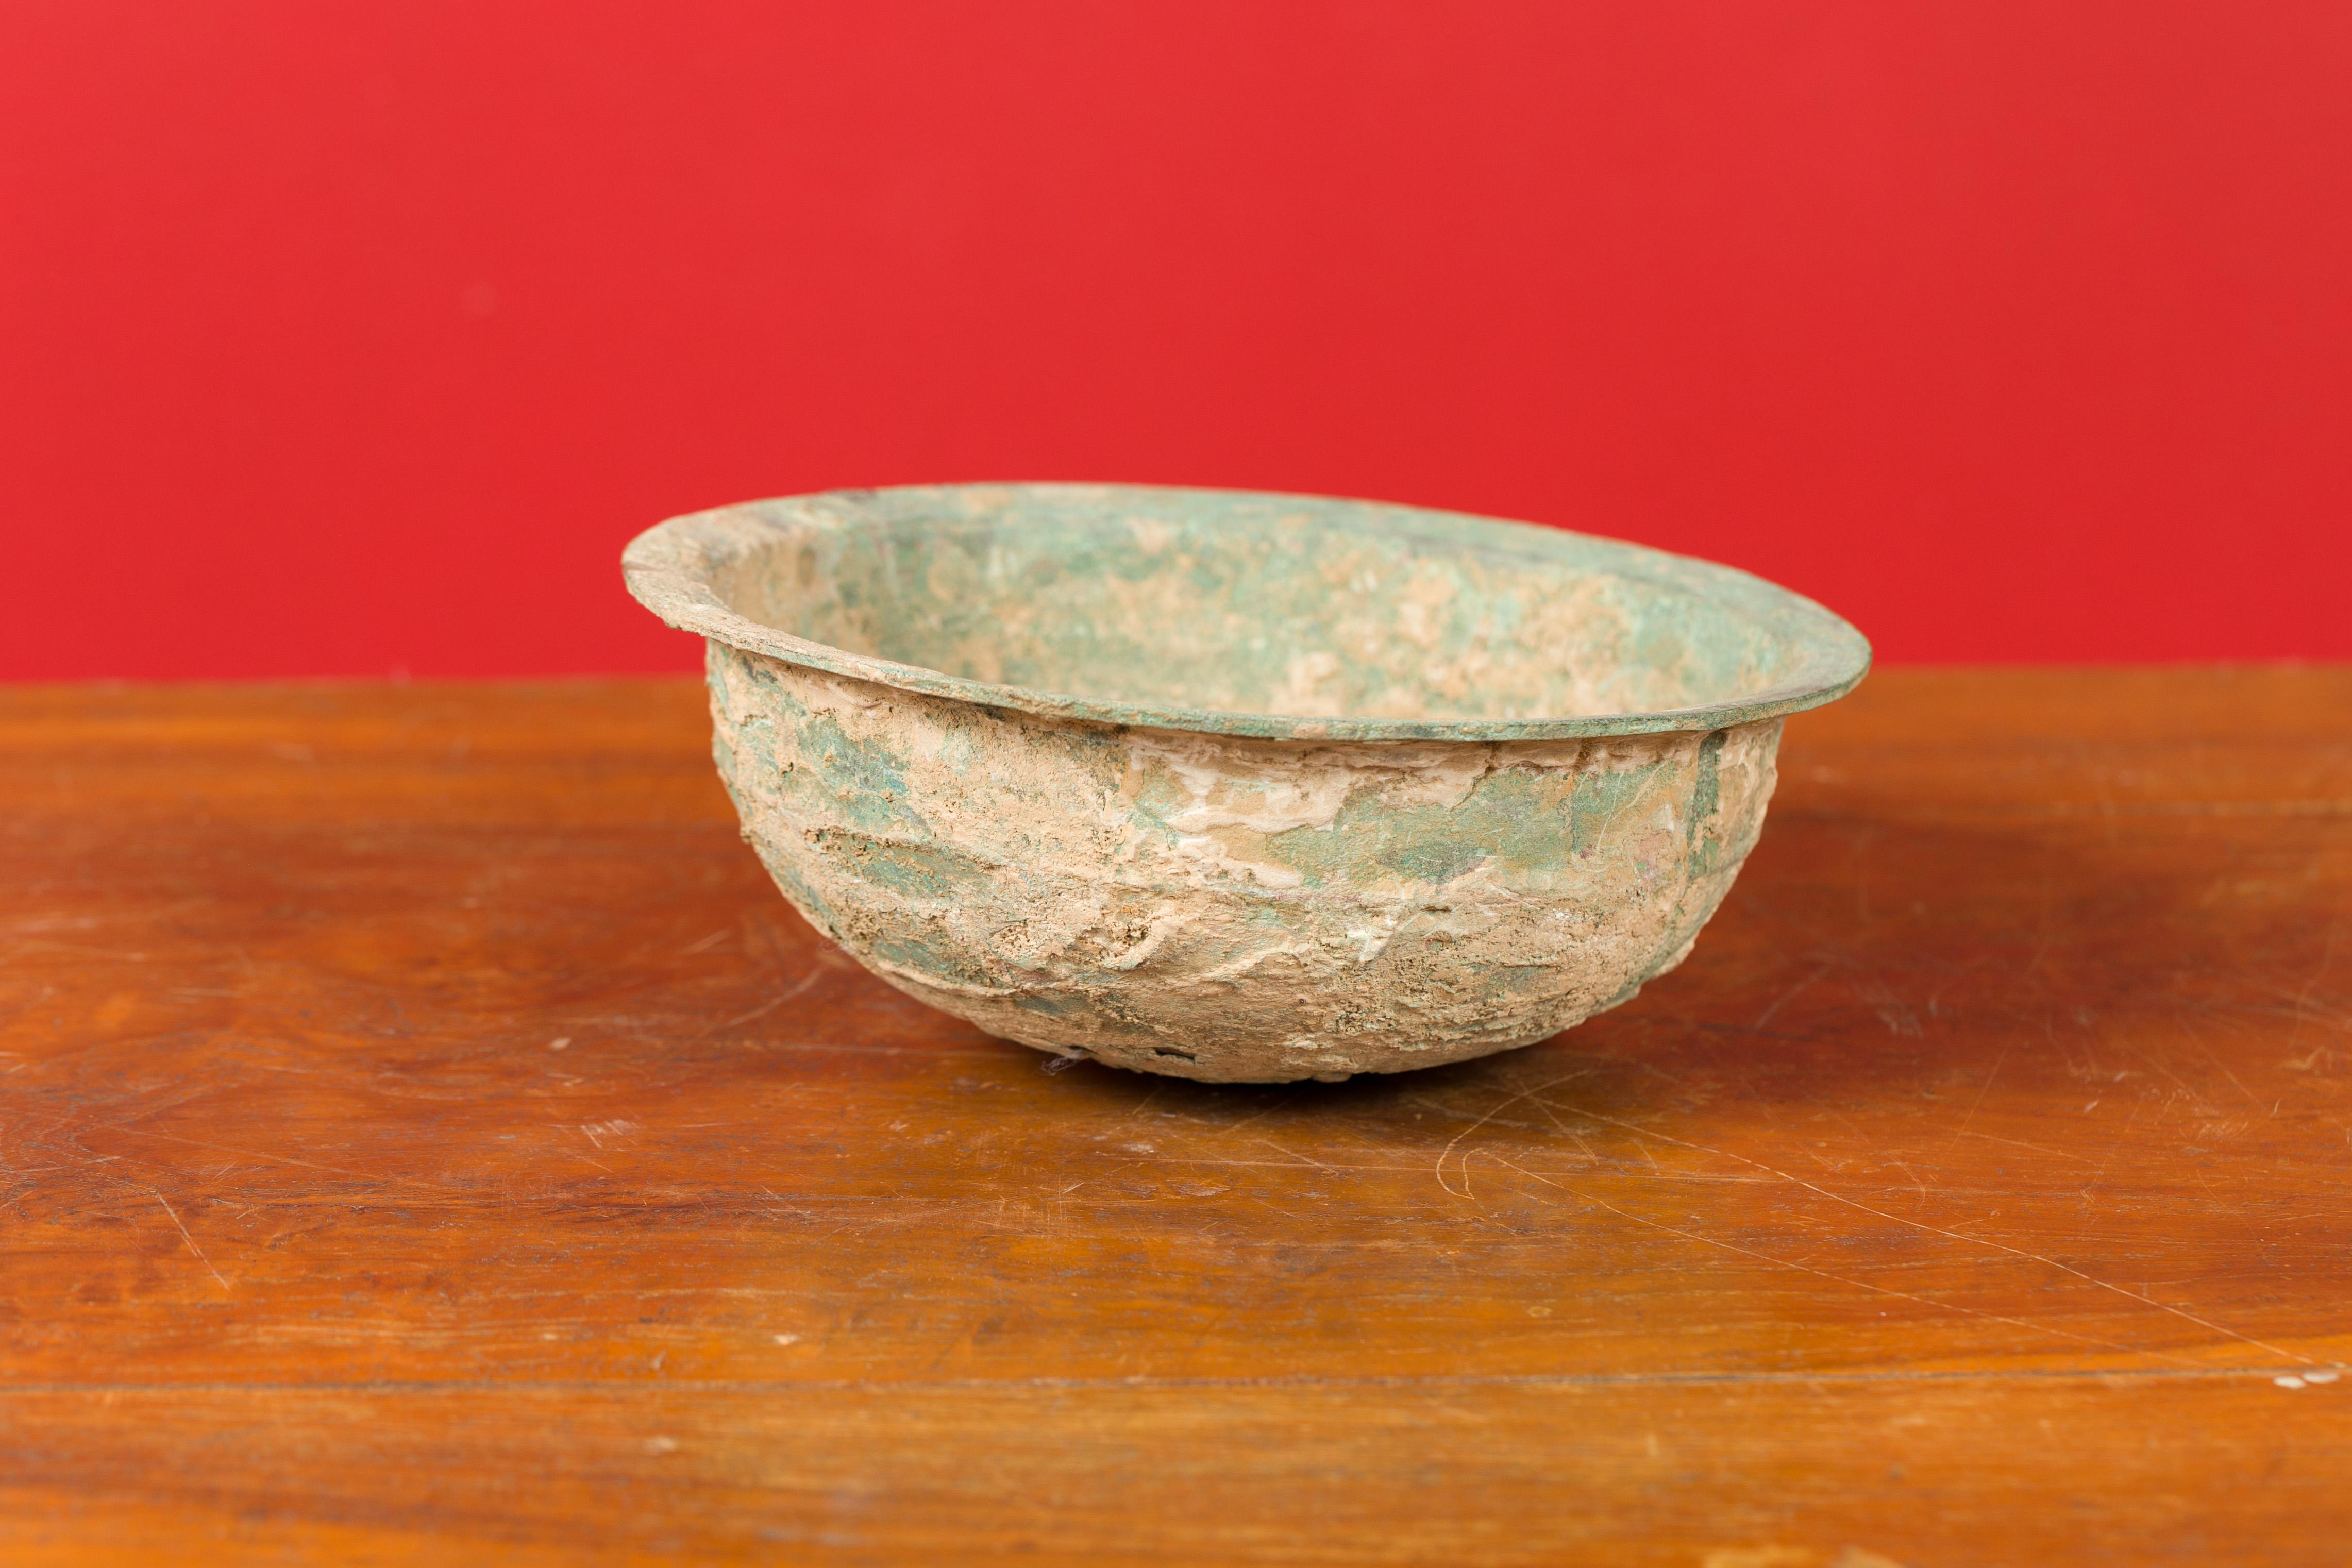 Chinese Han Dynasty Bronze Bowl circa 202 BC-200 AD with Mineral Deposits 7